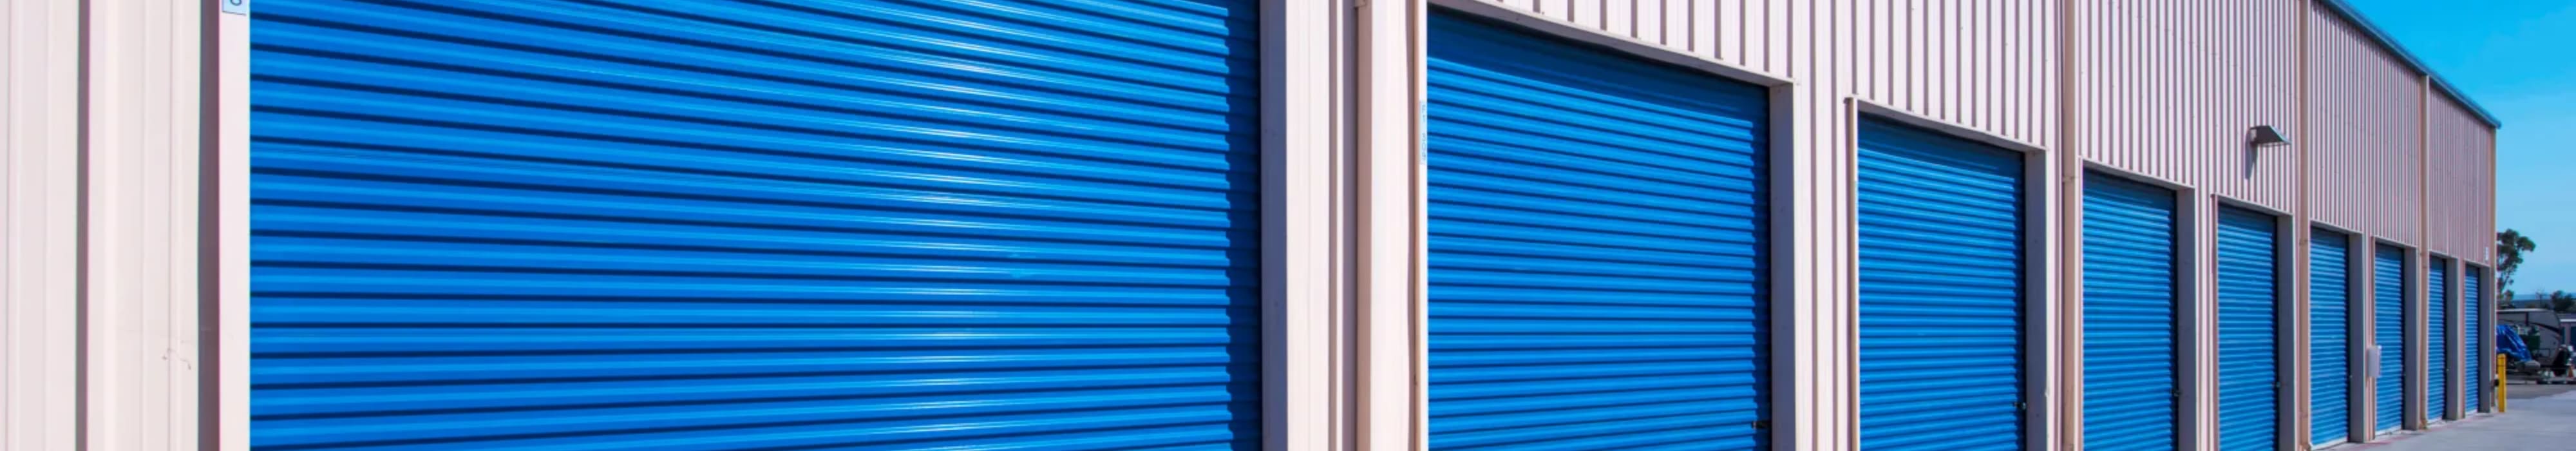 Outdoor units at Otay Crossing Self Storage in San Diego, California